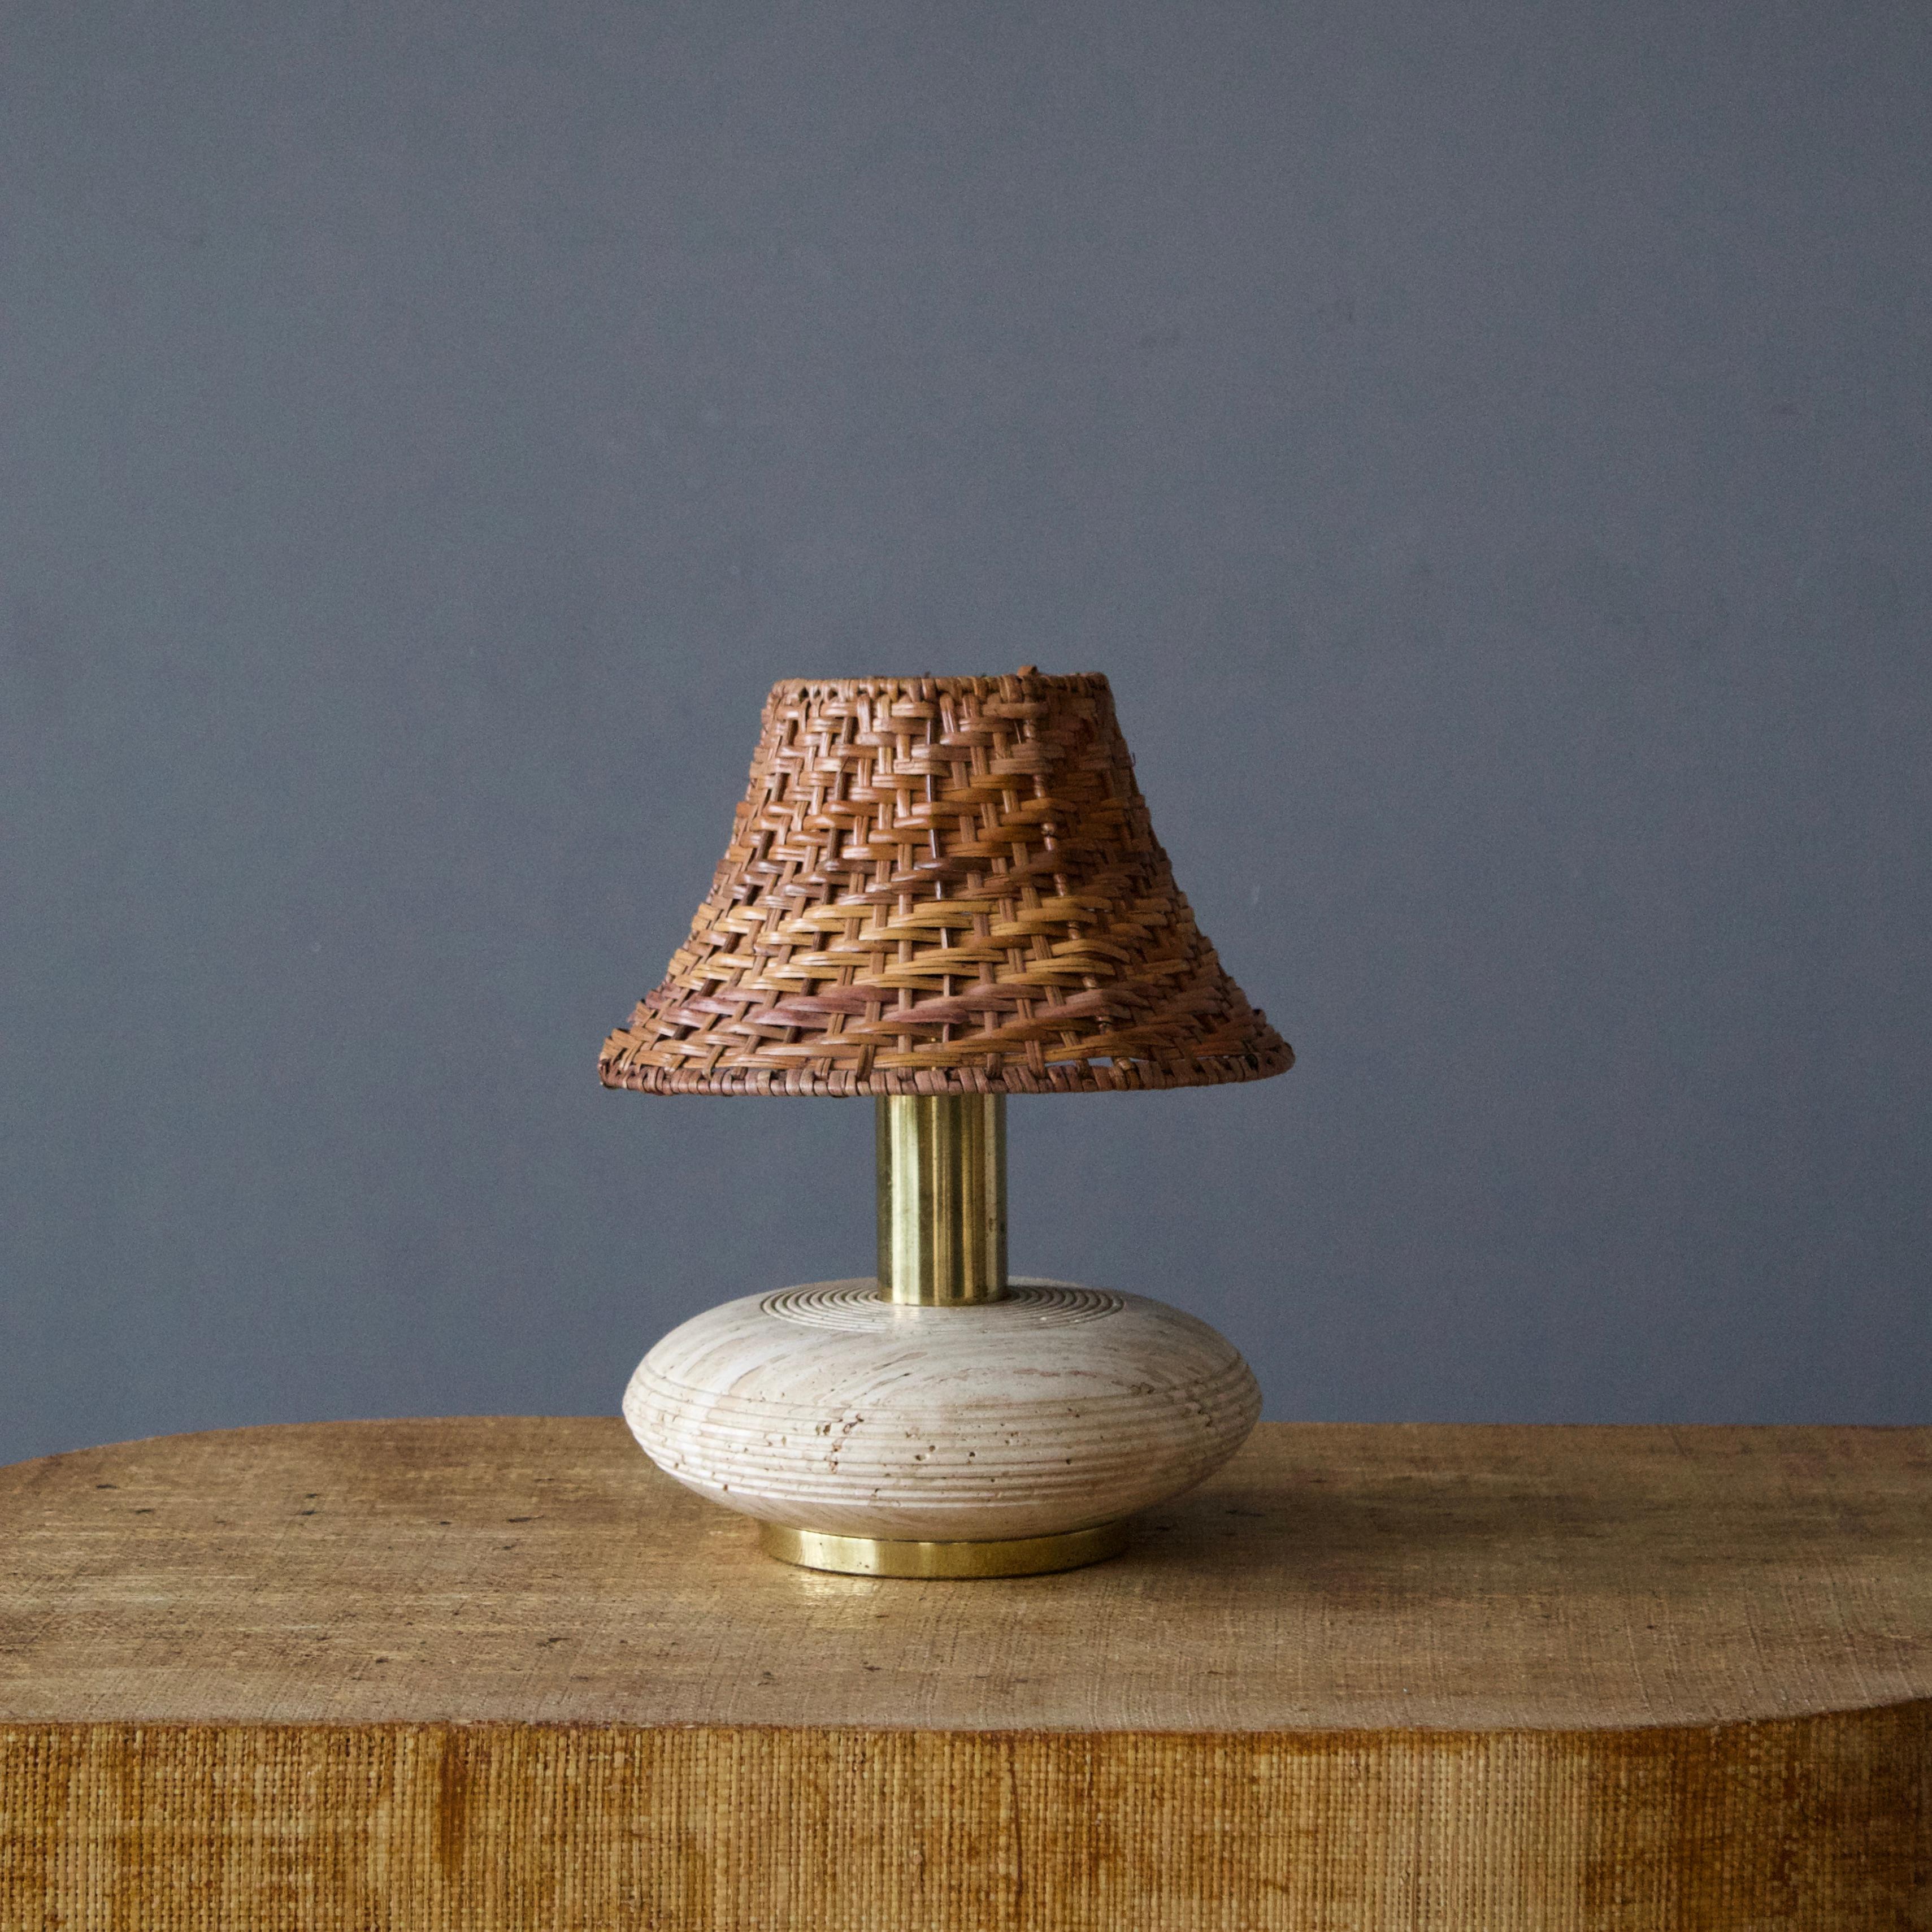 A table lamp, produced in Italy, 1960s. Brass, Travertine, rattan lampshade.

Stated dimensions exclude lampshade, height includes socket.

Other designers of the period include Gio Ponti, Fontana Arte, Max Ingrand, Franco Albini, and Josef